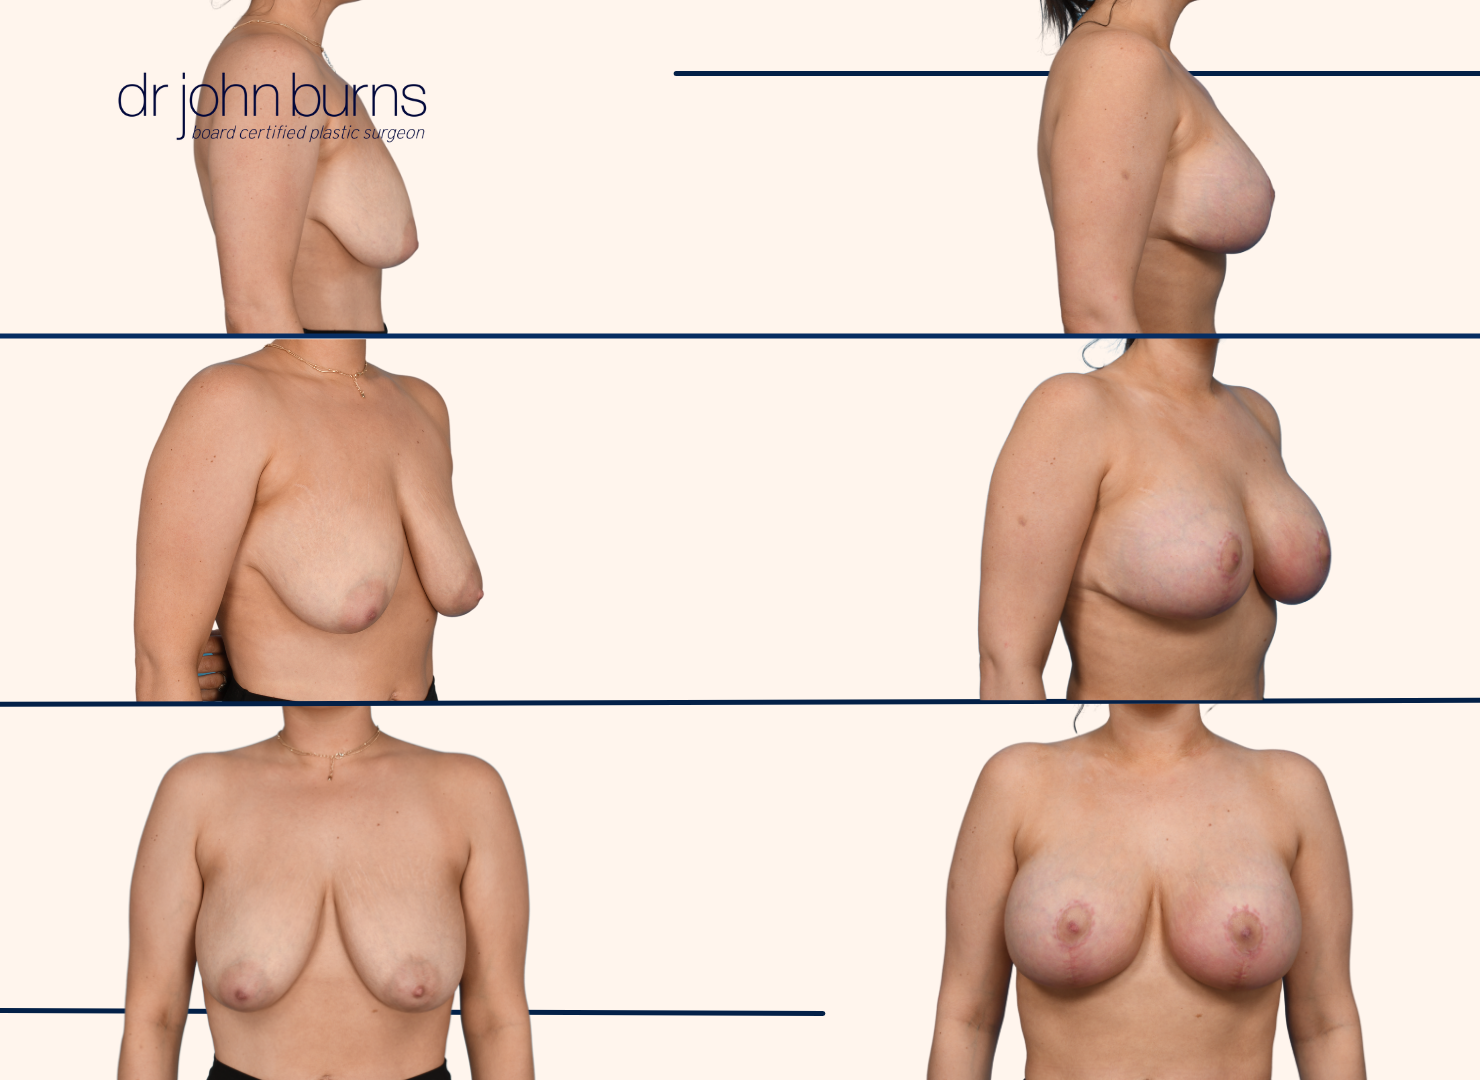 Before and after breast lift with breast implants